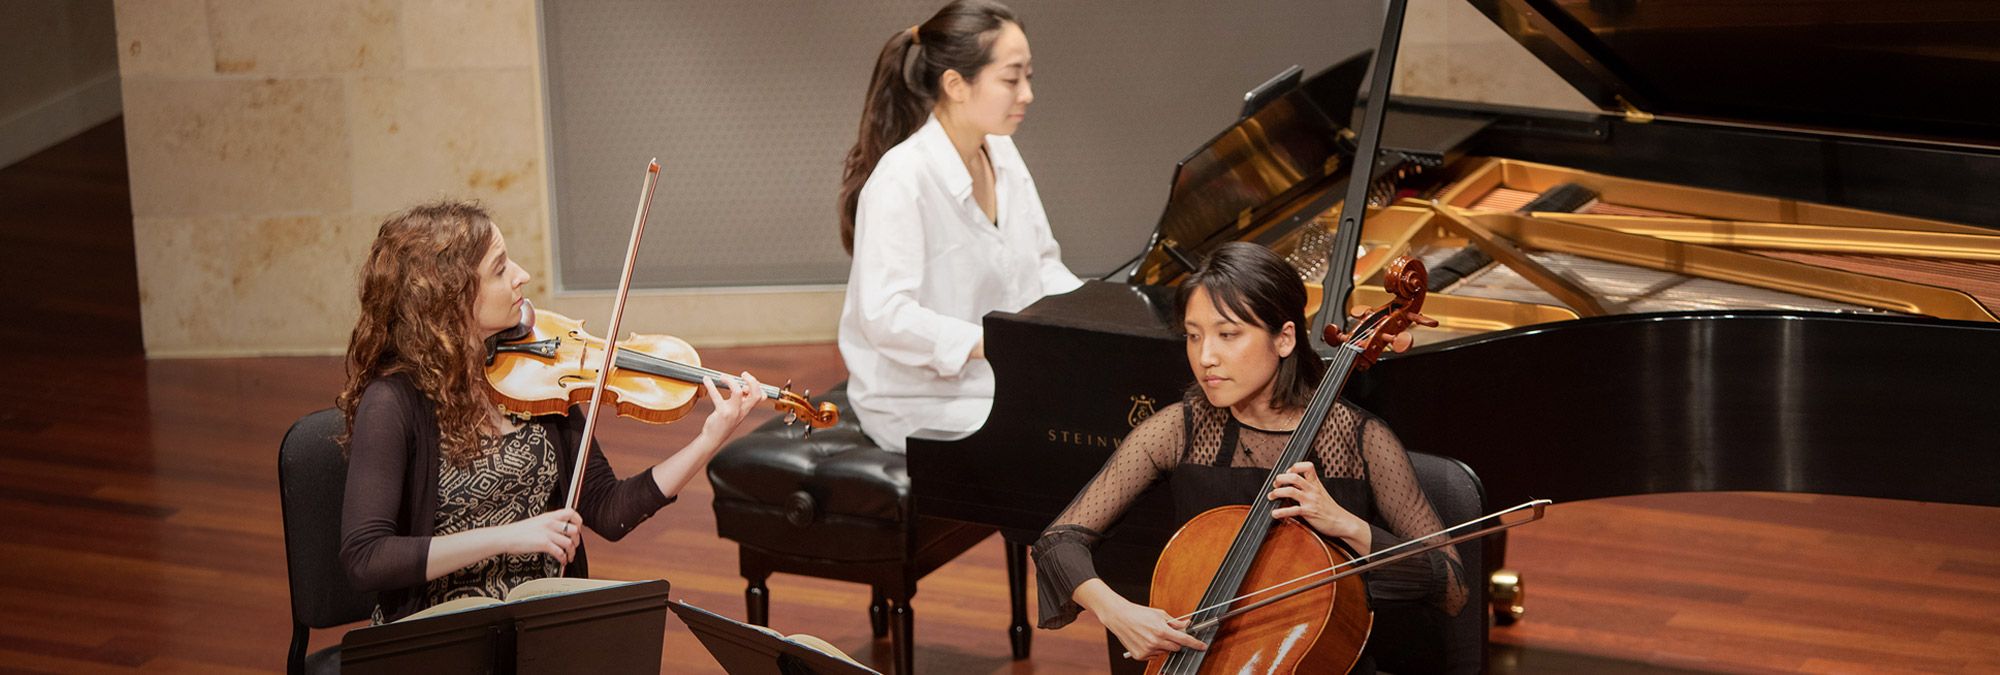 String and piano chamber music performance, 19-20 Performance Calendar